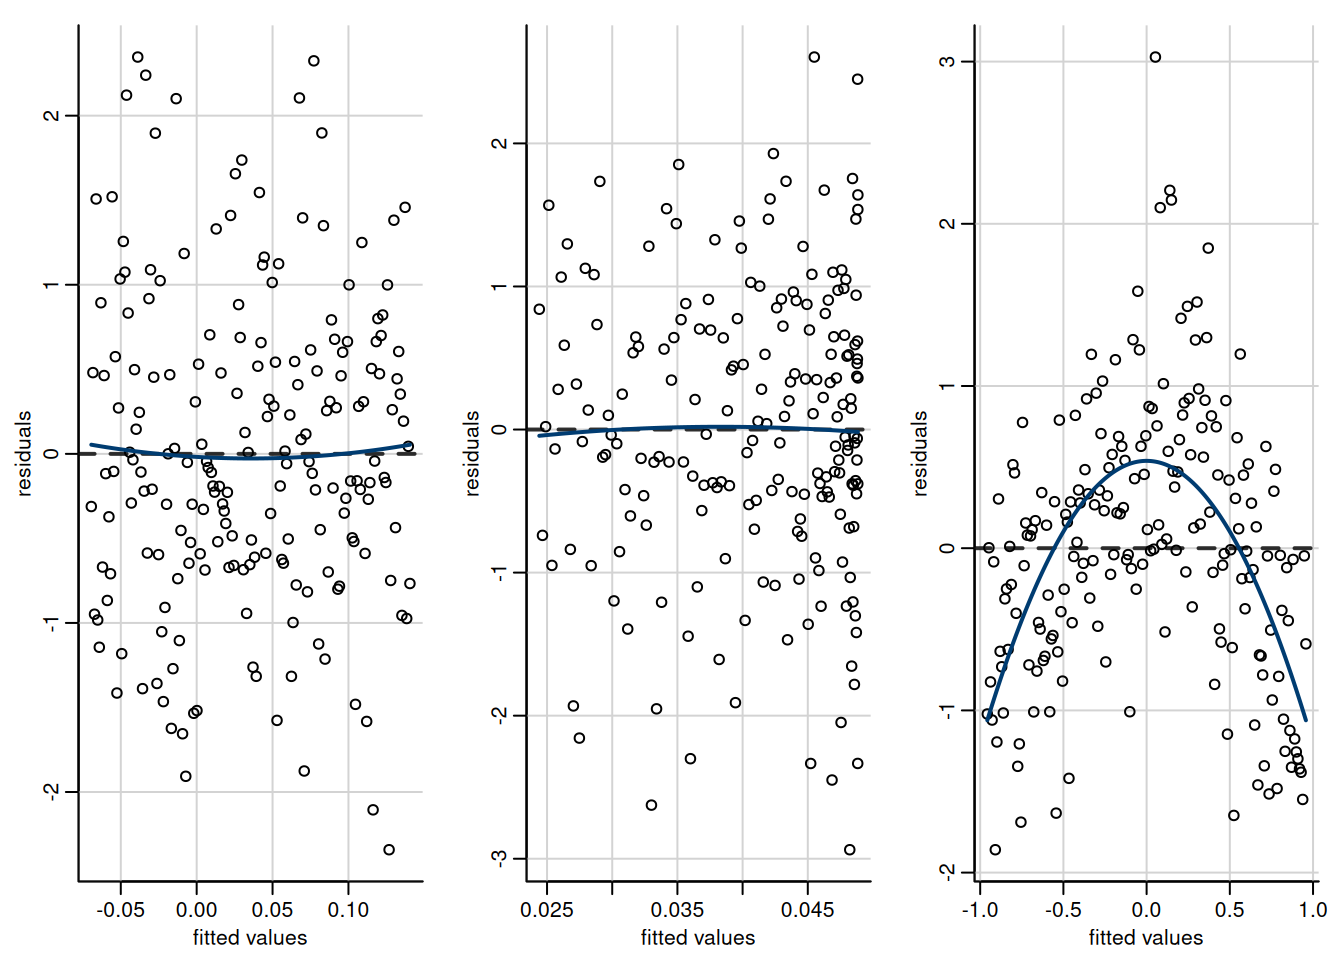 Scatterplots of residuals against fitted values. The first two plots show no departure from linearity (mean zero). The third plot shows a clear quadratic pattern, suggesting the mean model is misspecified. Note that the distribution of the fitted value need not be uniform, as in the second panel which shows more high fitted values.